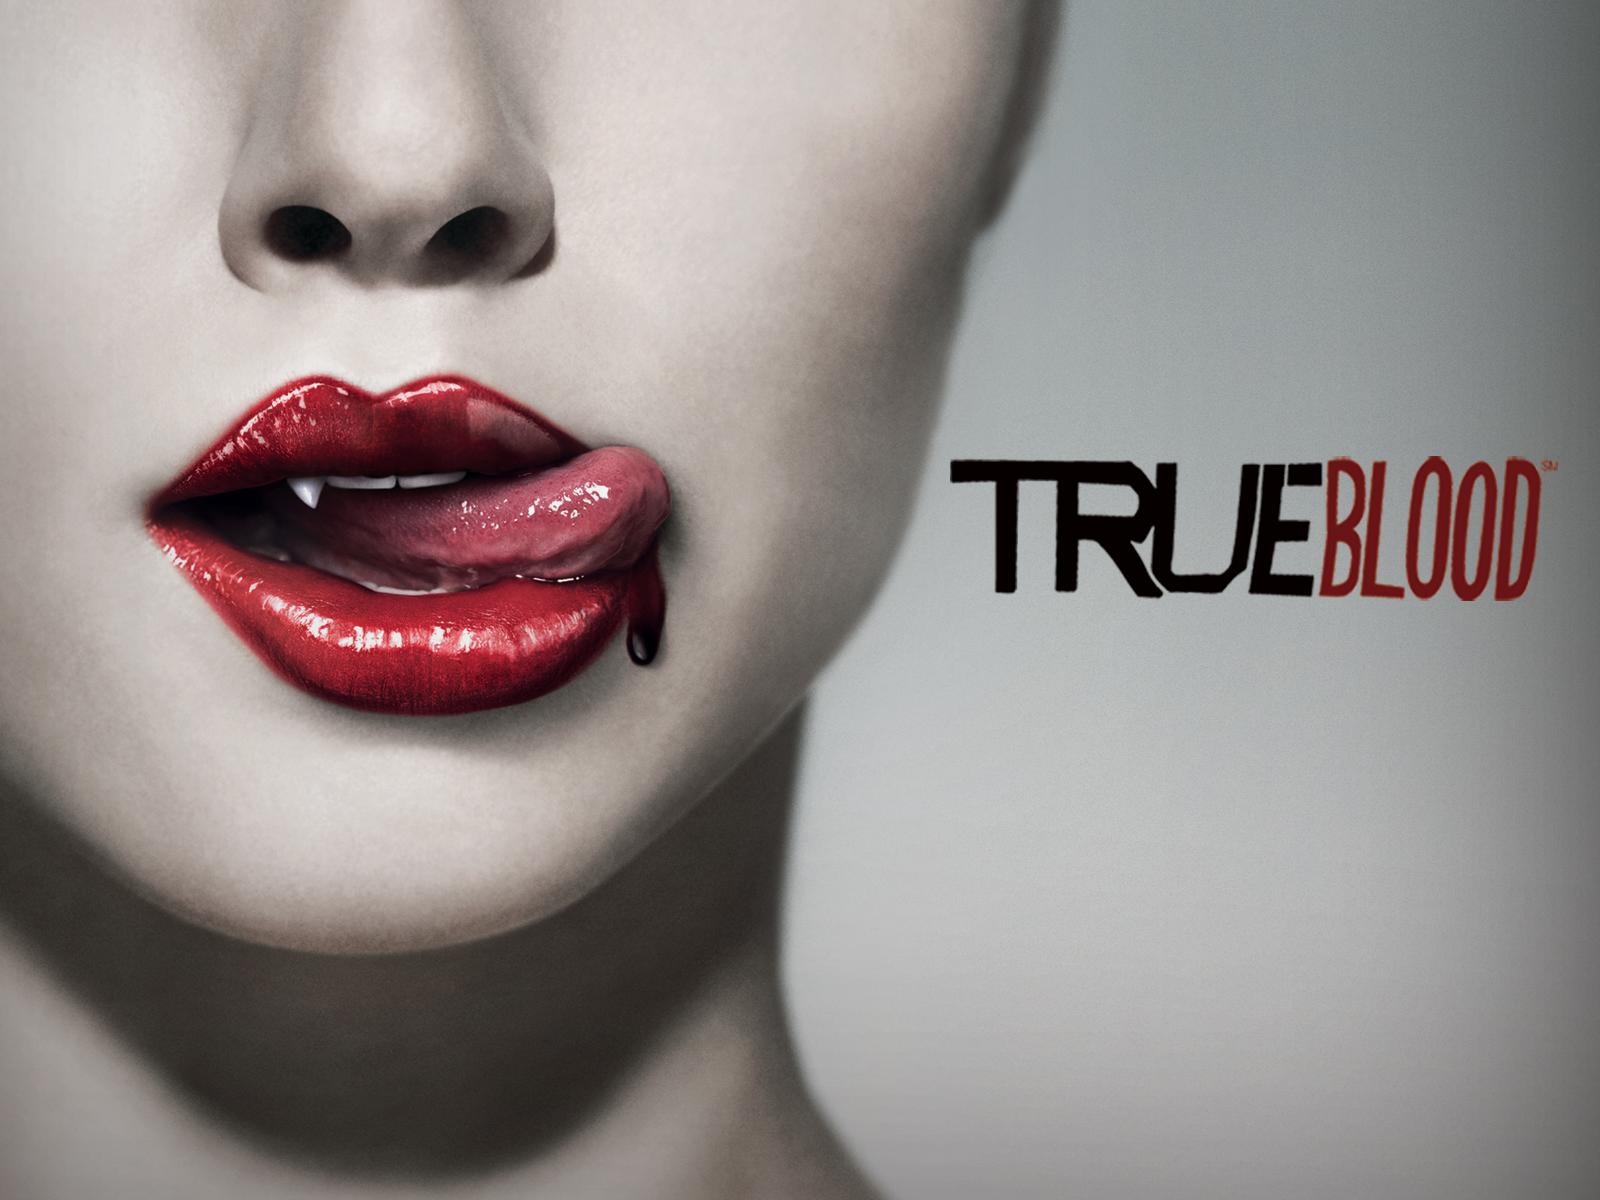 dana witmer recommends true blood season 1 streaming pic